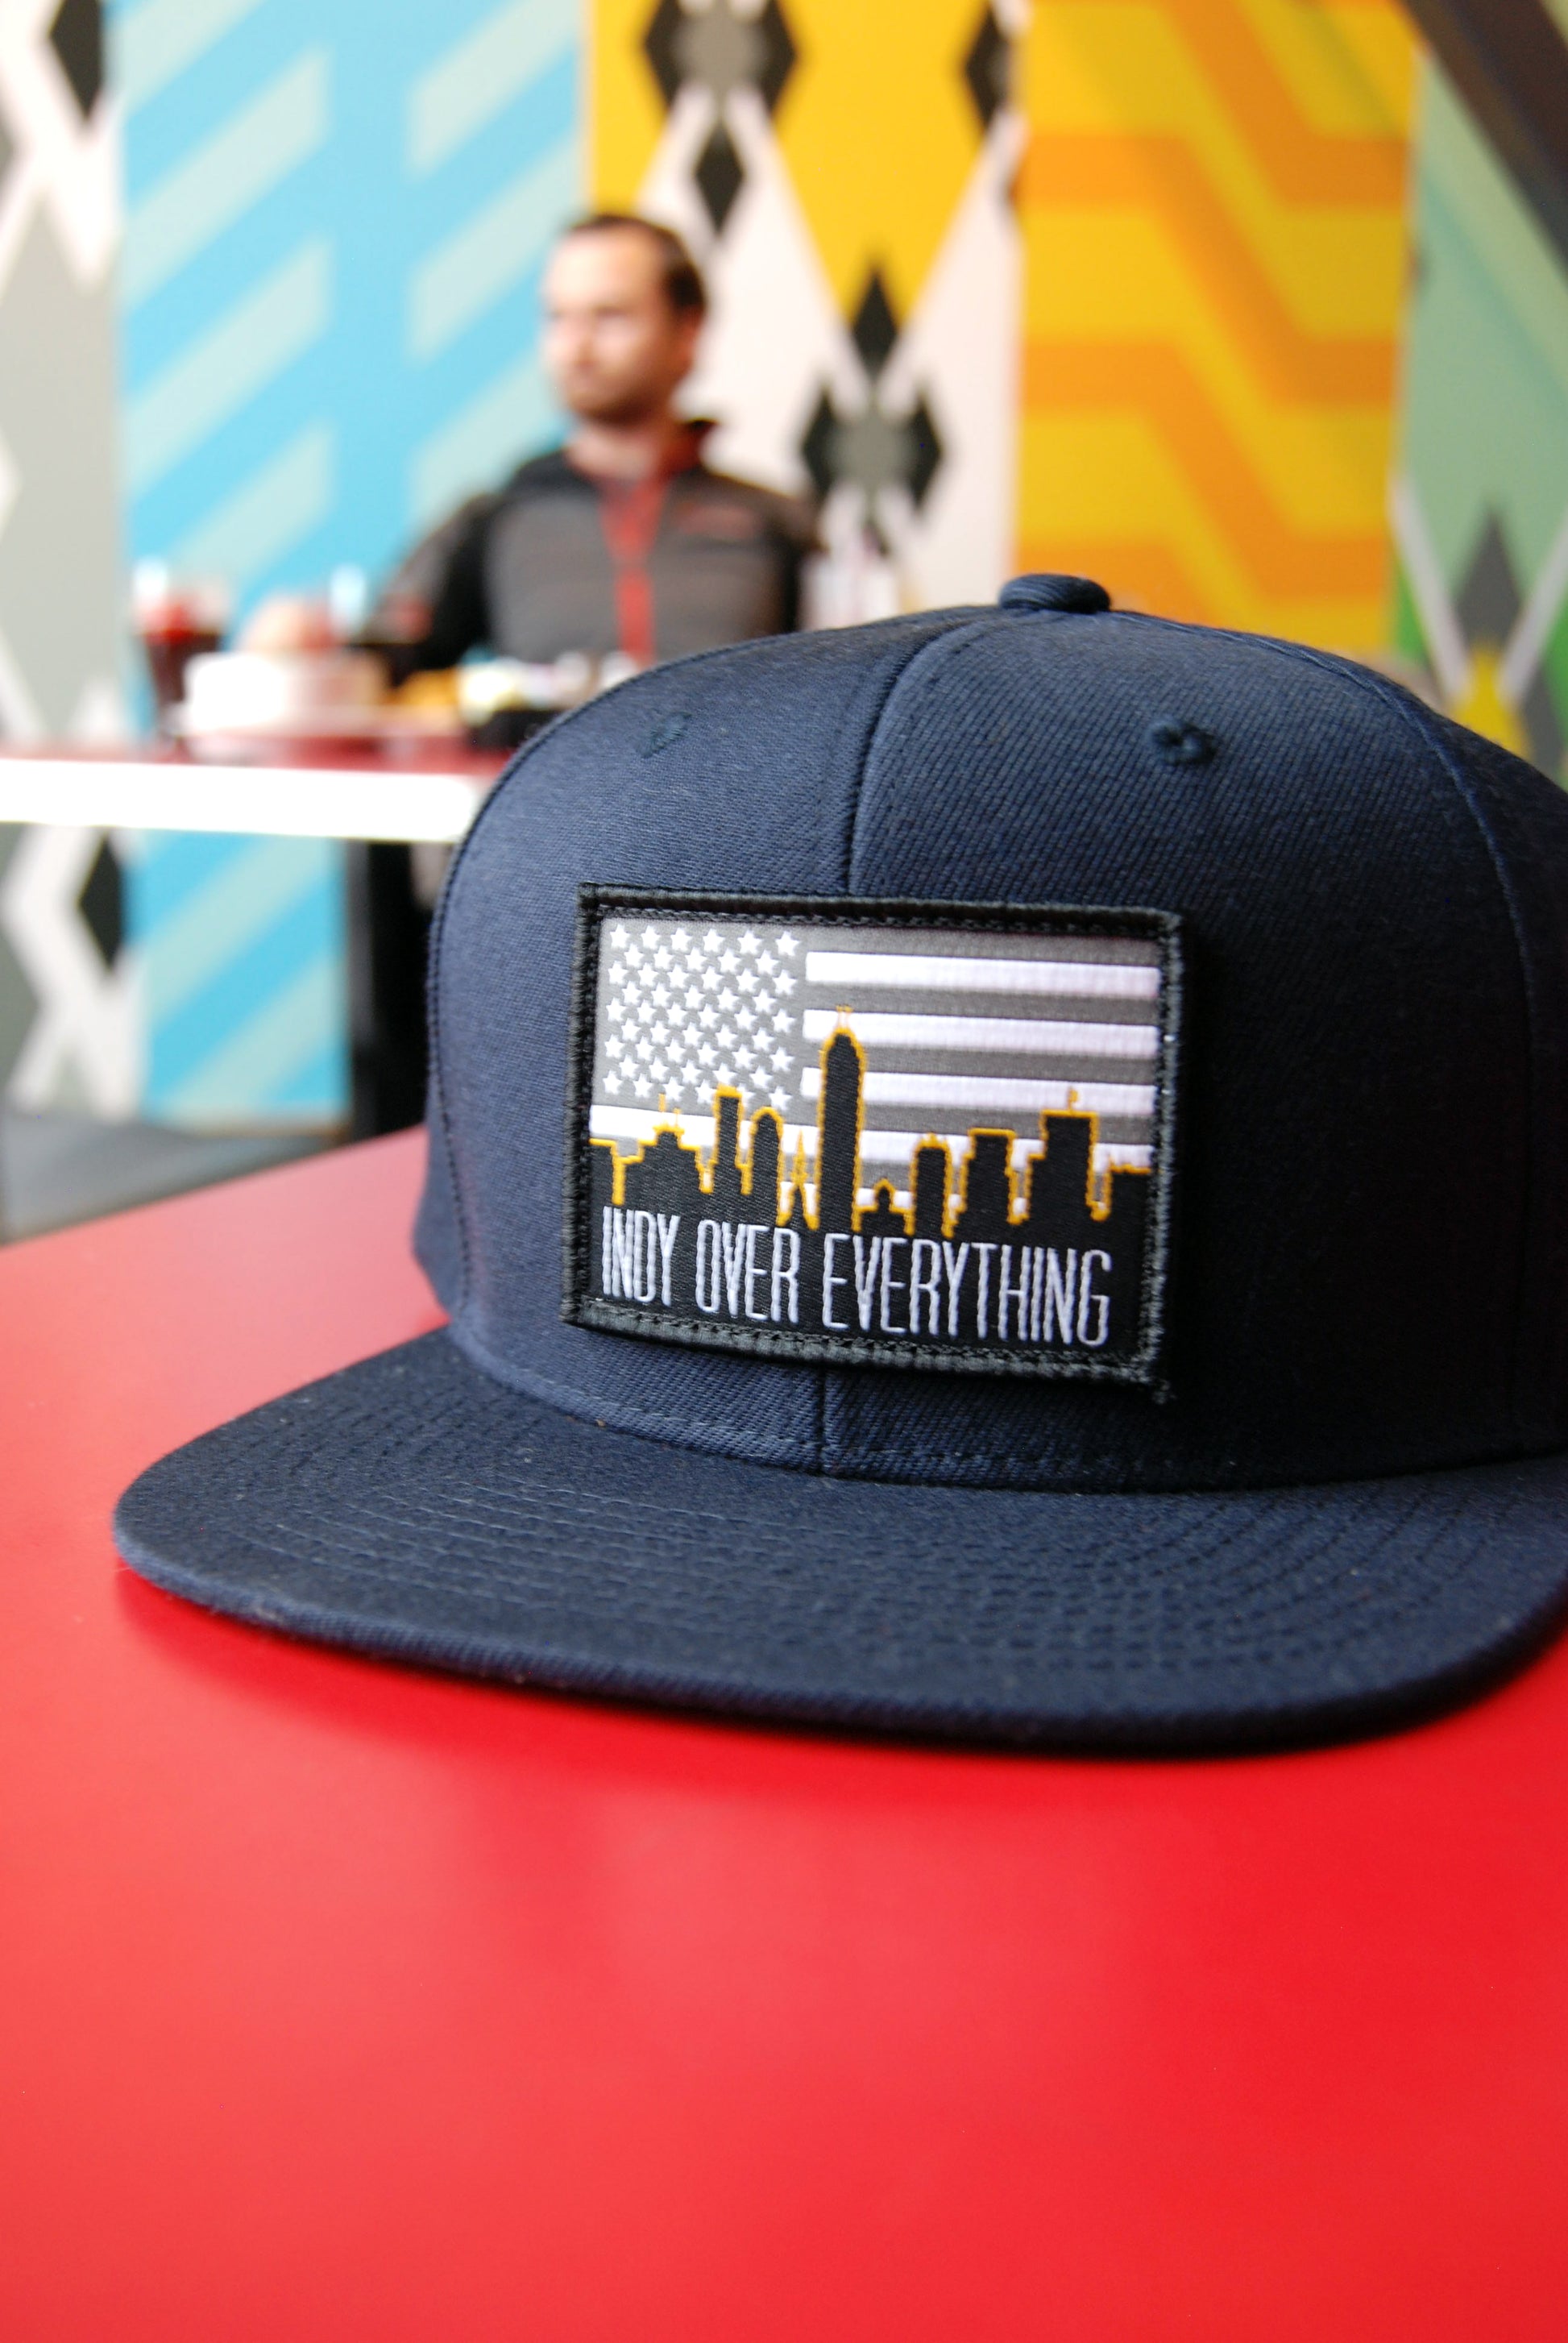 SKYLINE HAT - NAVY - Indy Over Everything